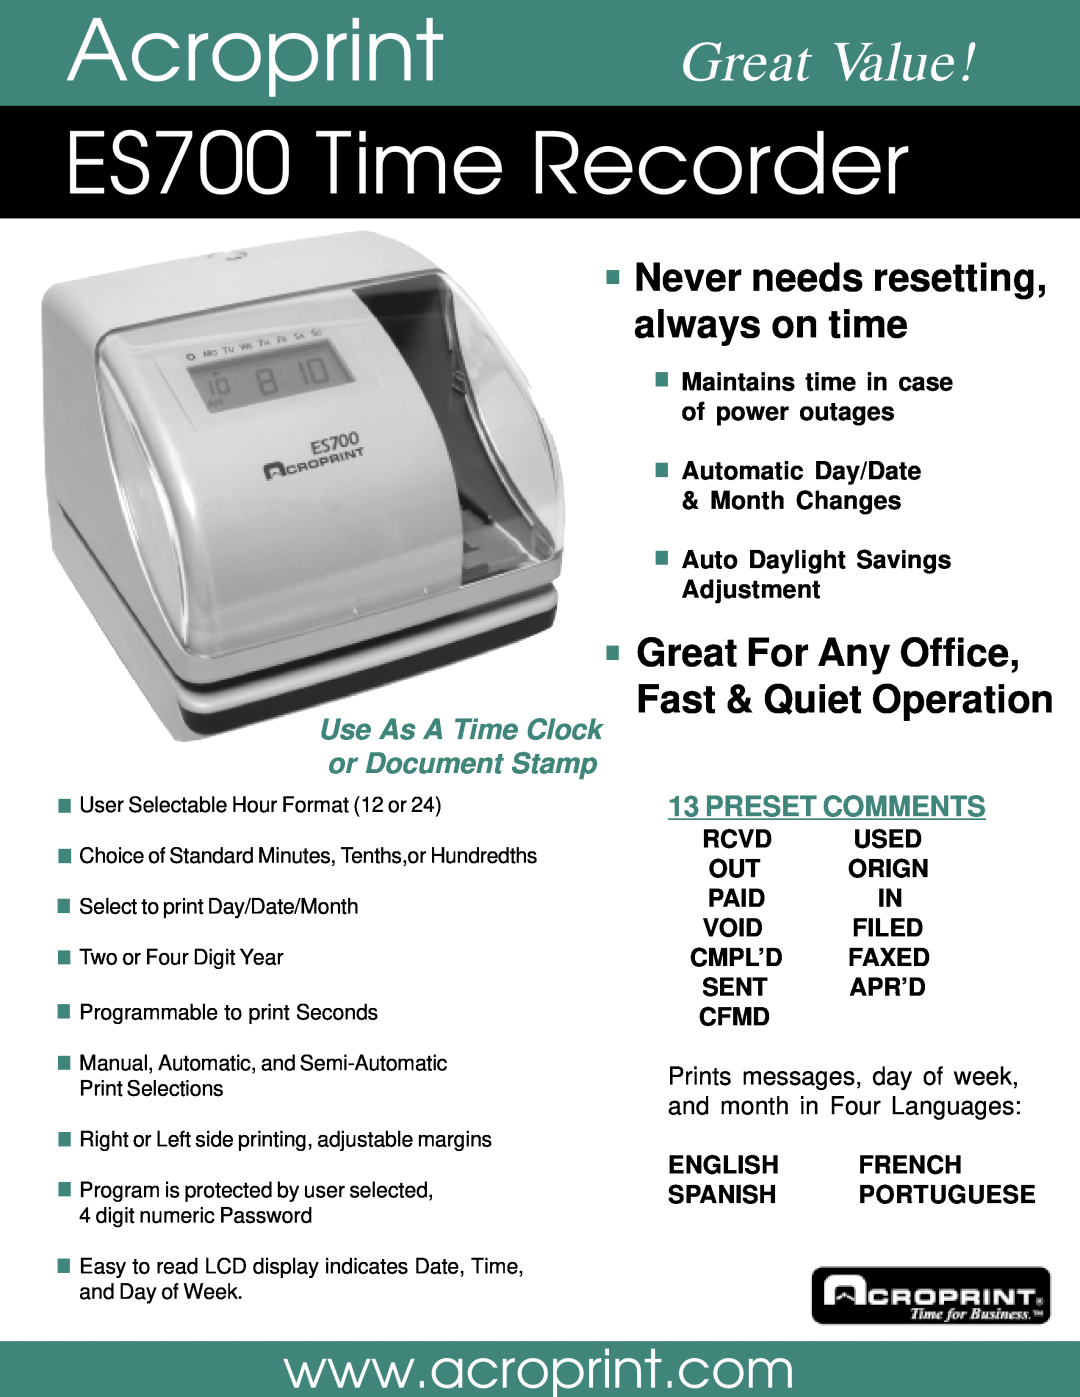 Acroprint manual ES700 Time Recorder, Acroprint Great Value, Never needs resetting, always on time, Preset Comments 